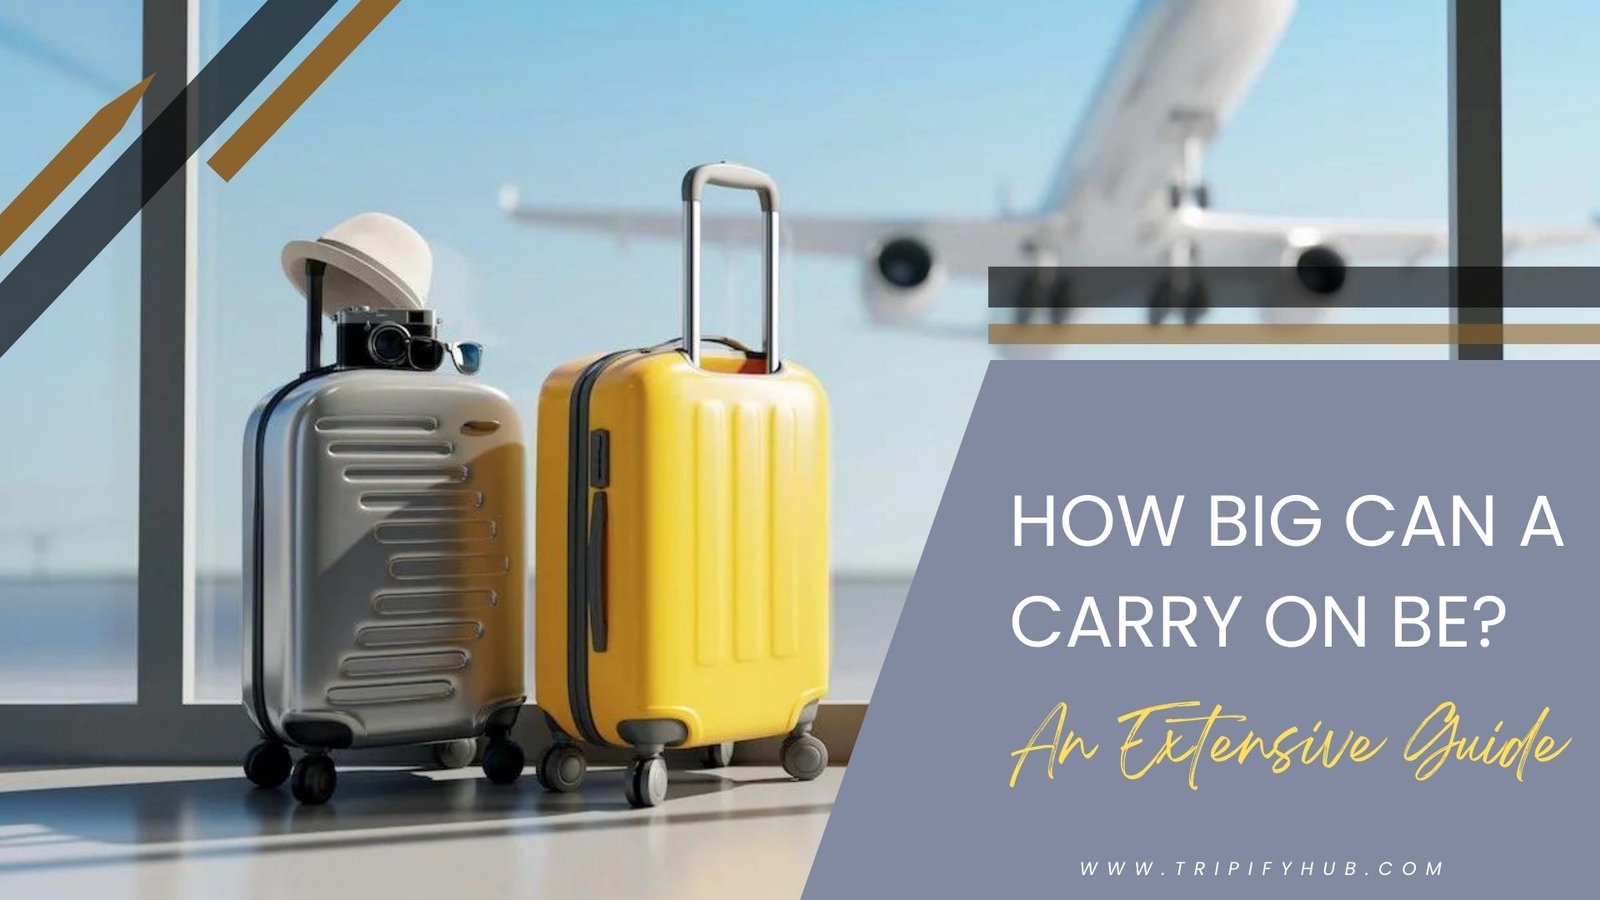 How big can a carry on be?